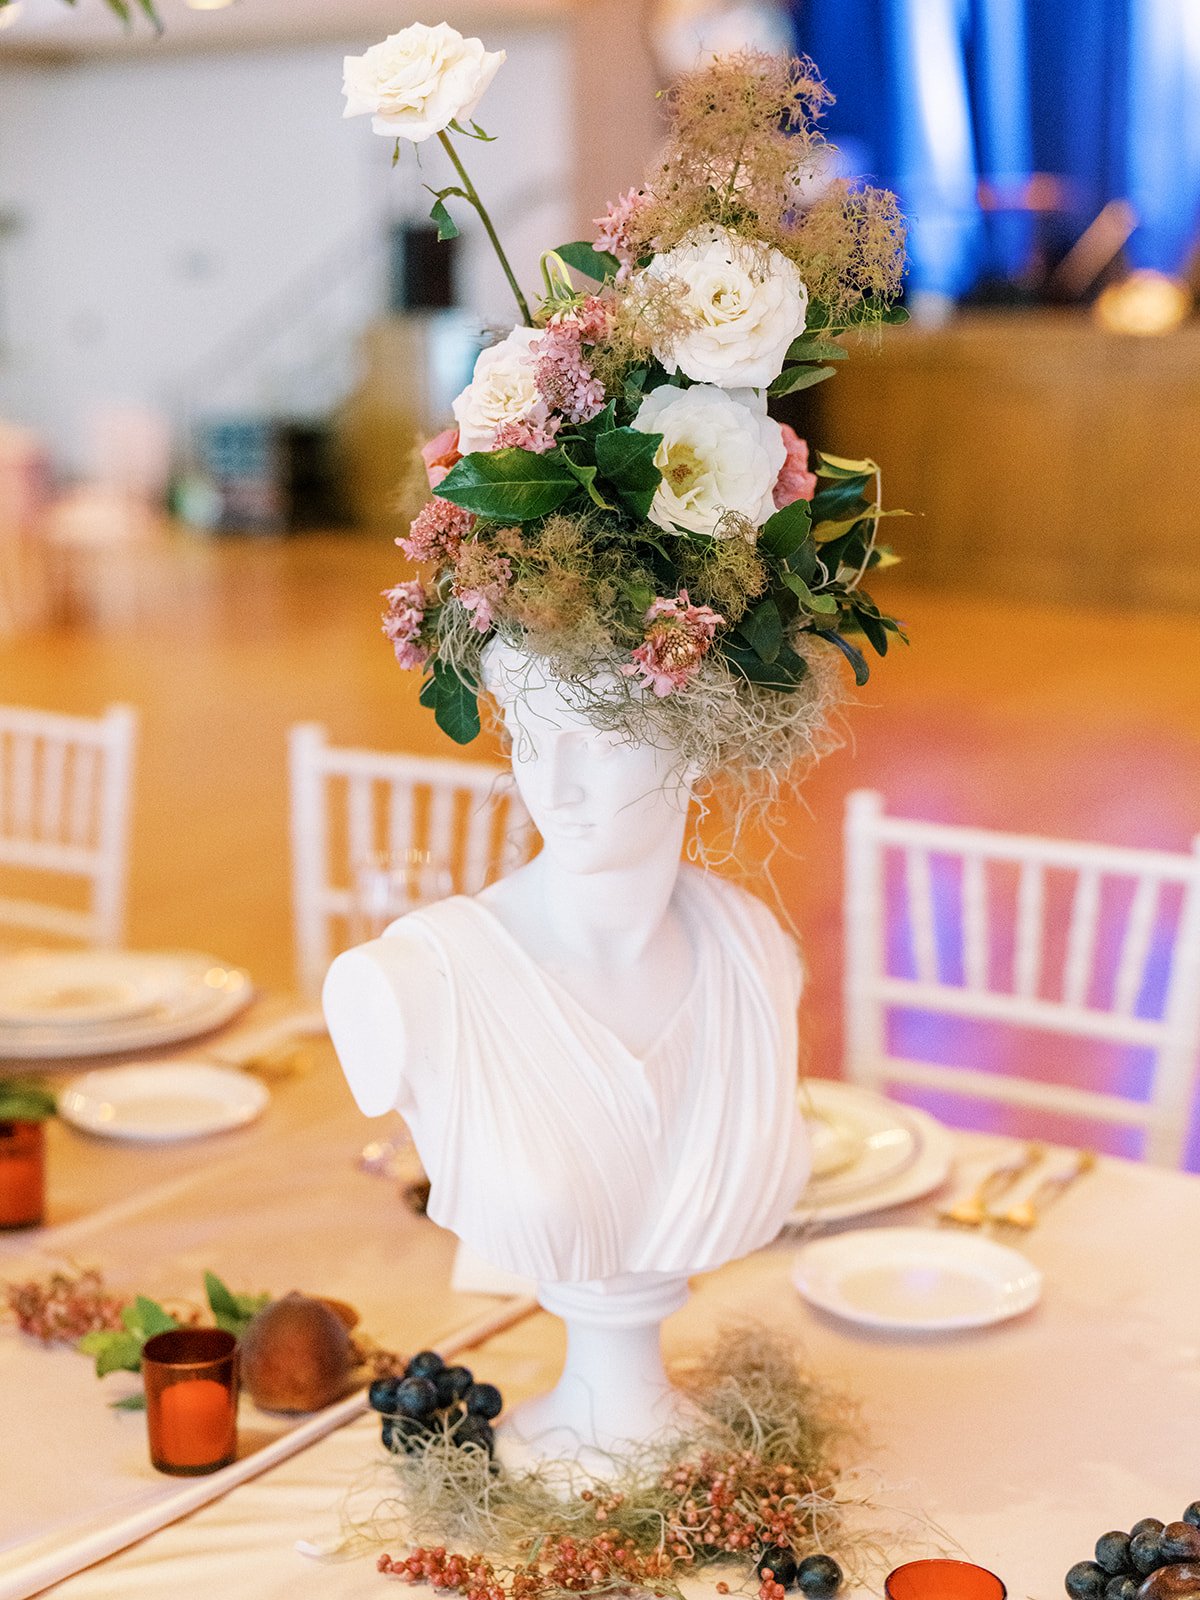 Beautiful reception adorned with marble busts covered in florals and lush centerpieces. The summer solstice color palette was filled with garden roses, peonies, ranunculus, pepper berry and fresh fruit. Design by Rosemary and Finch in Nashville, TN.